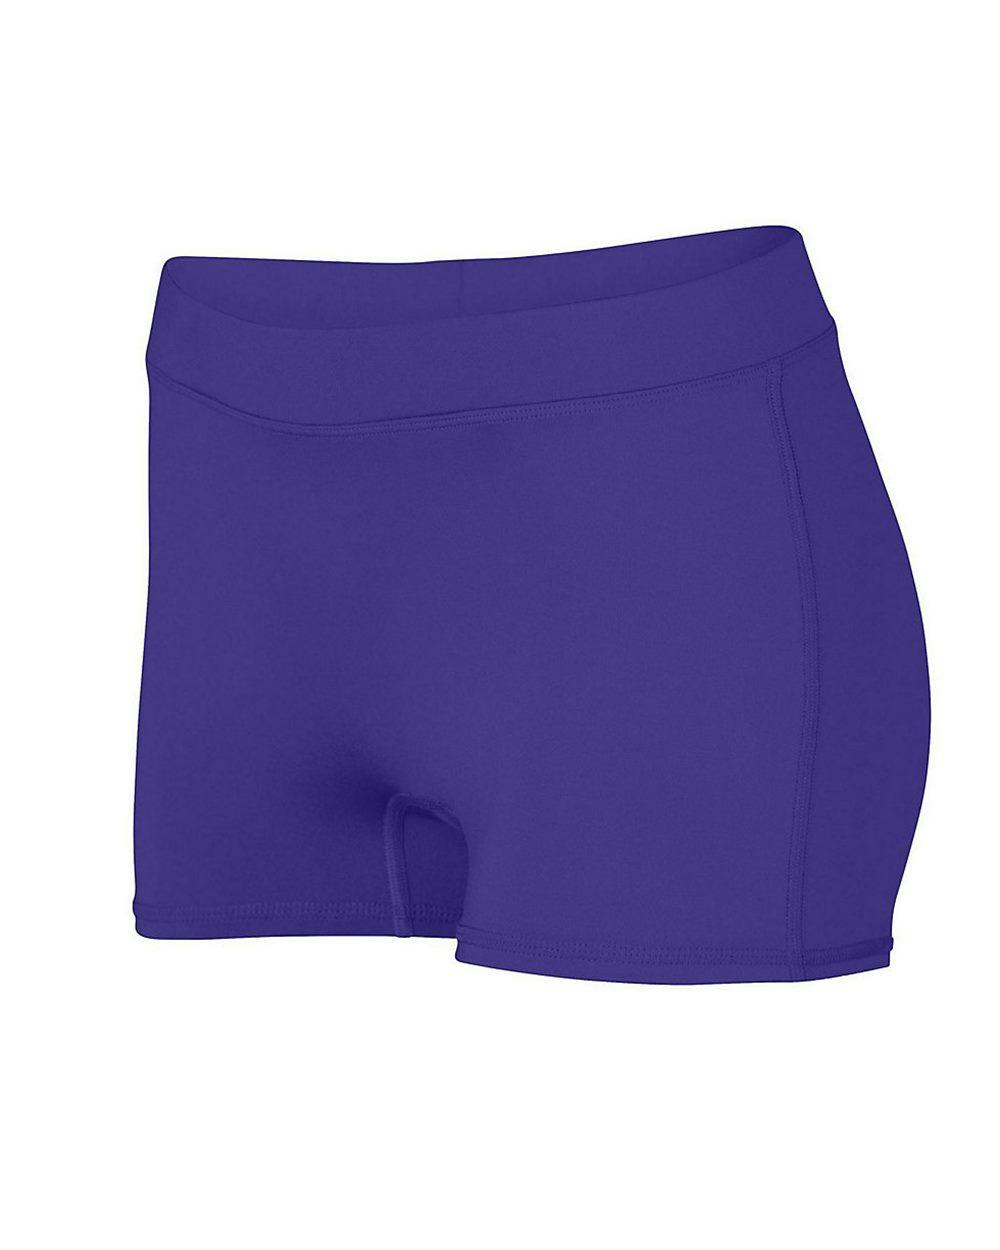 Image for Women's Dare Shorts - 1232